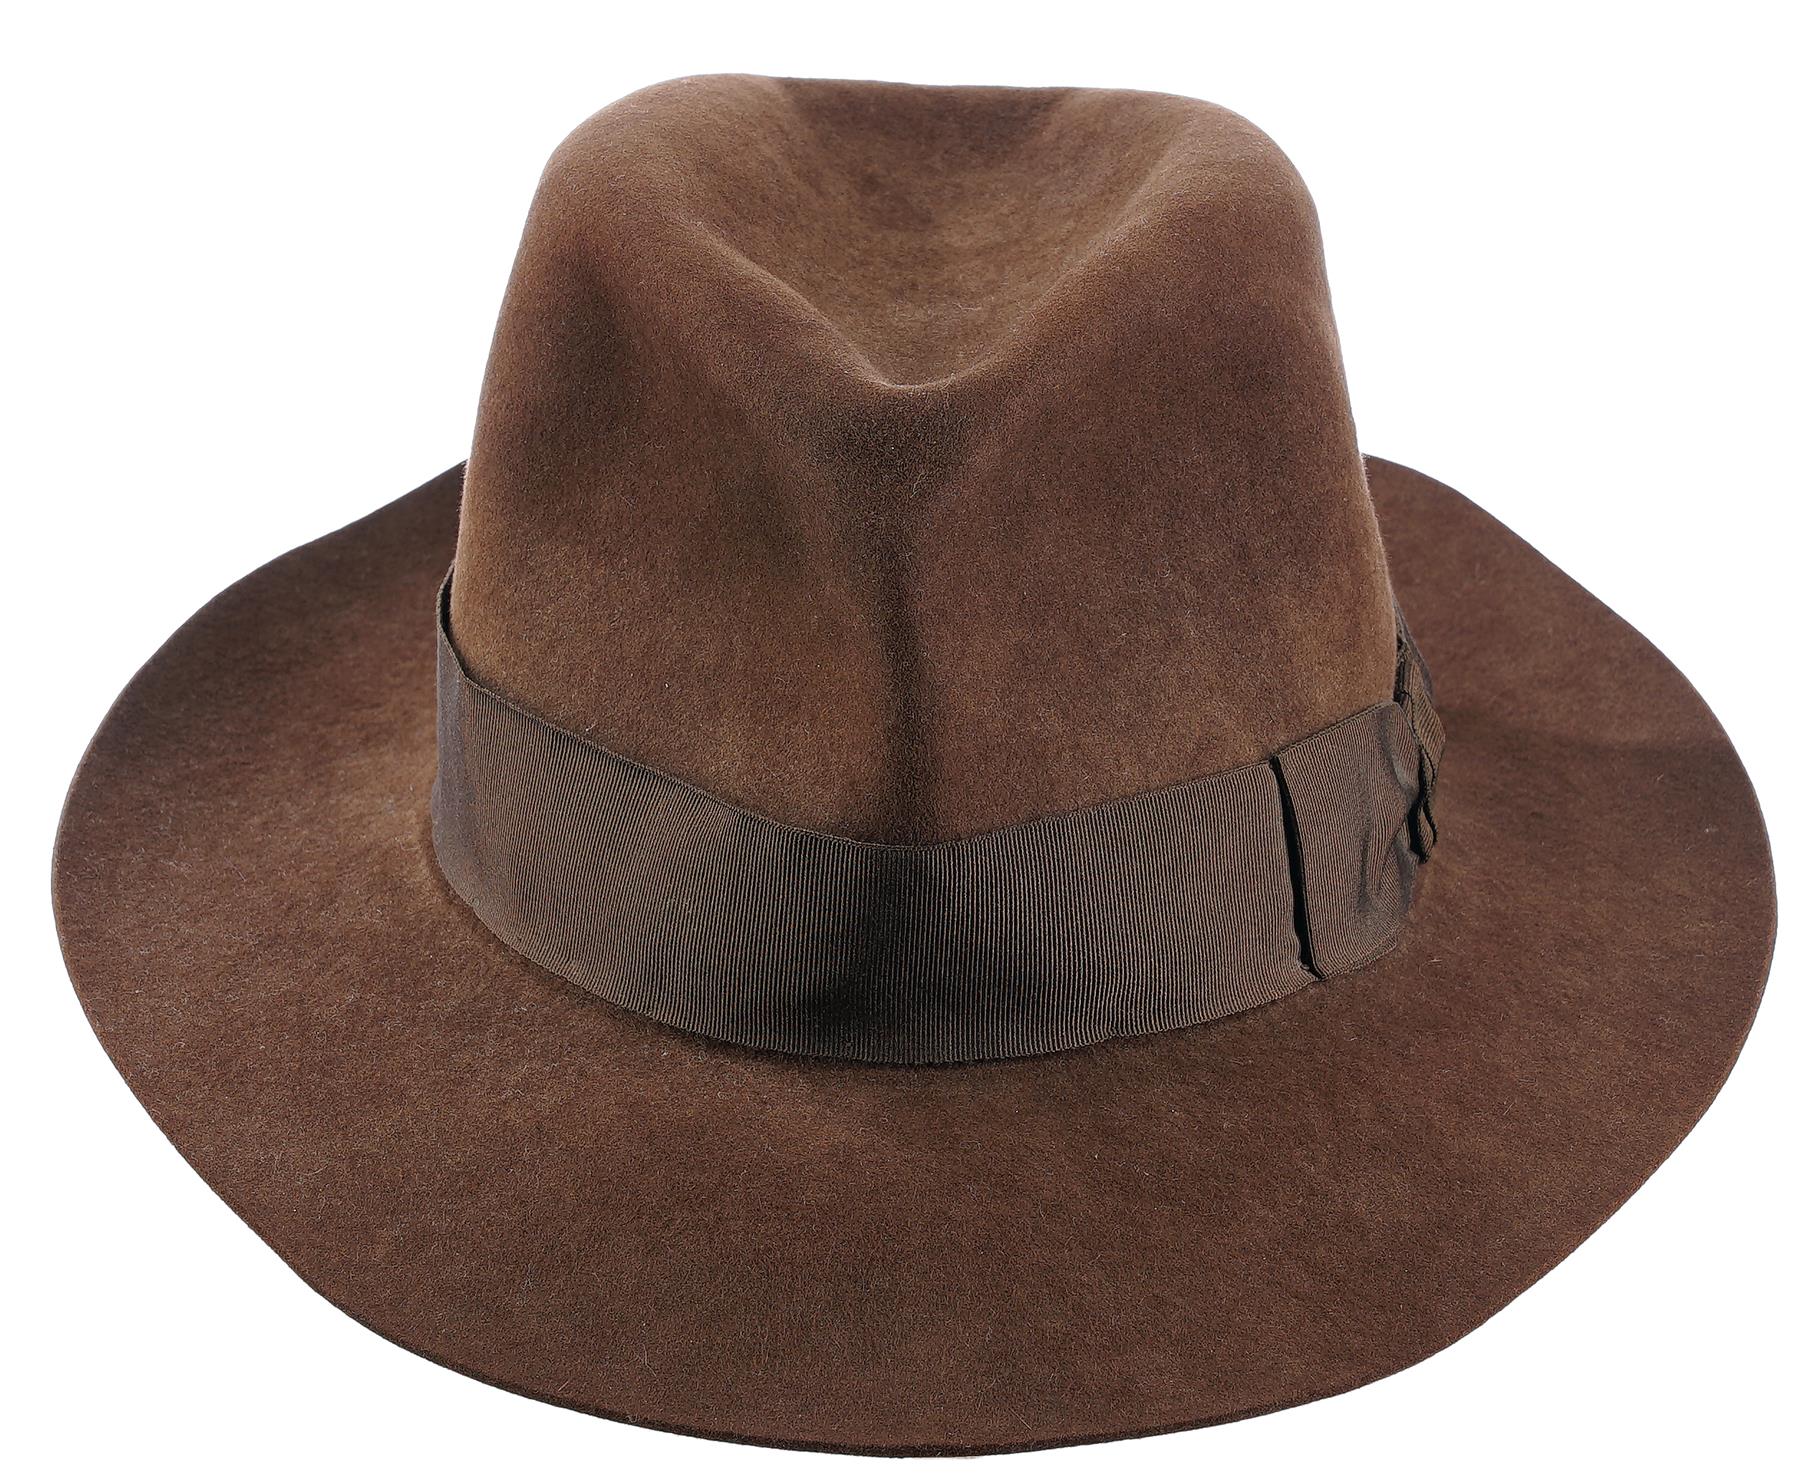 Harrison Ford's fedora from Indiana Jones, Prop Store auction